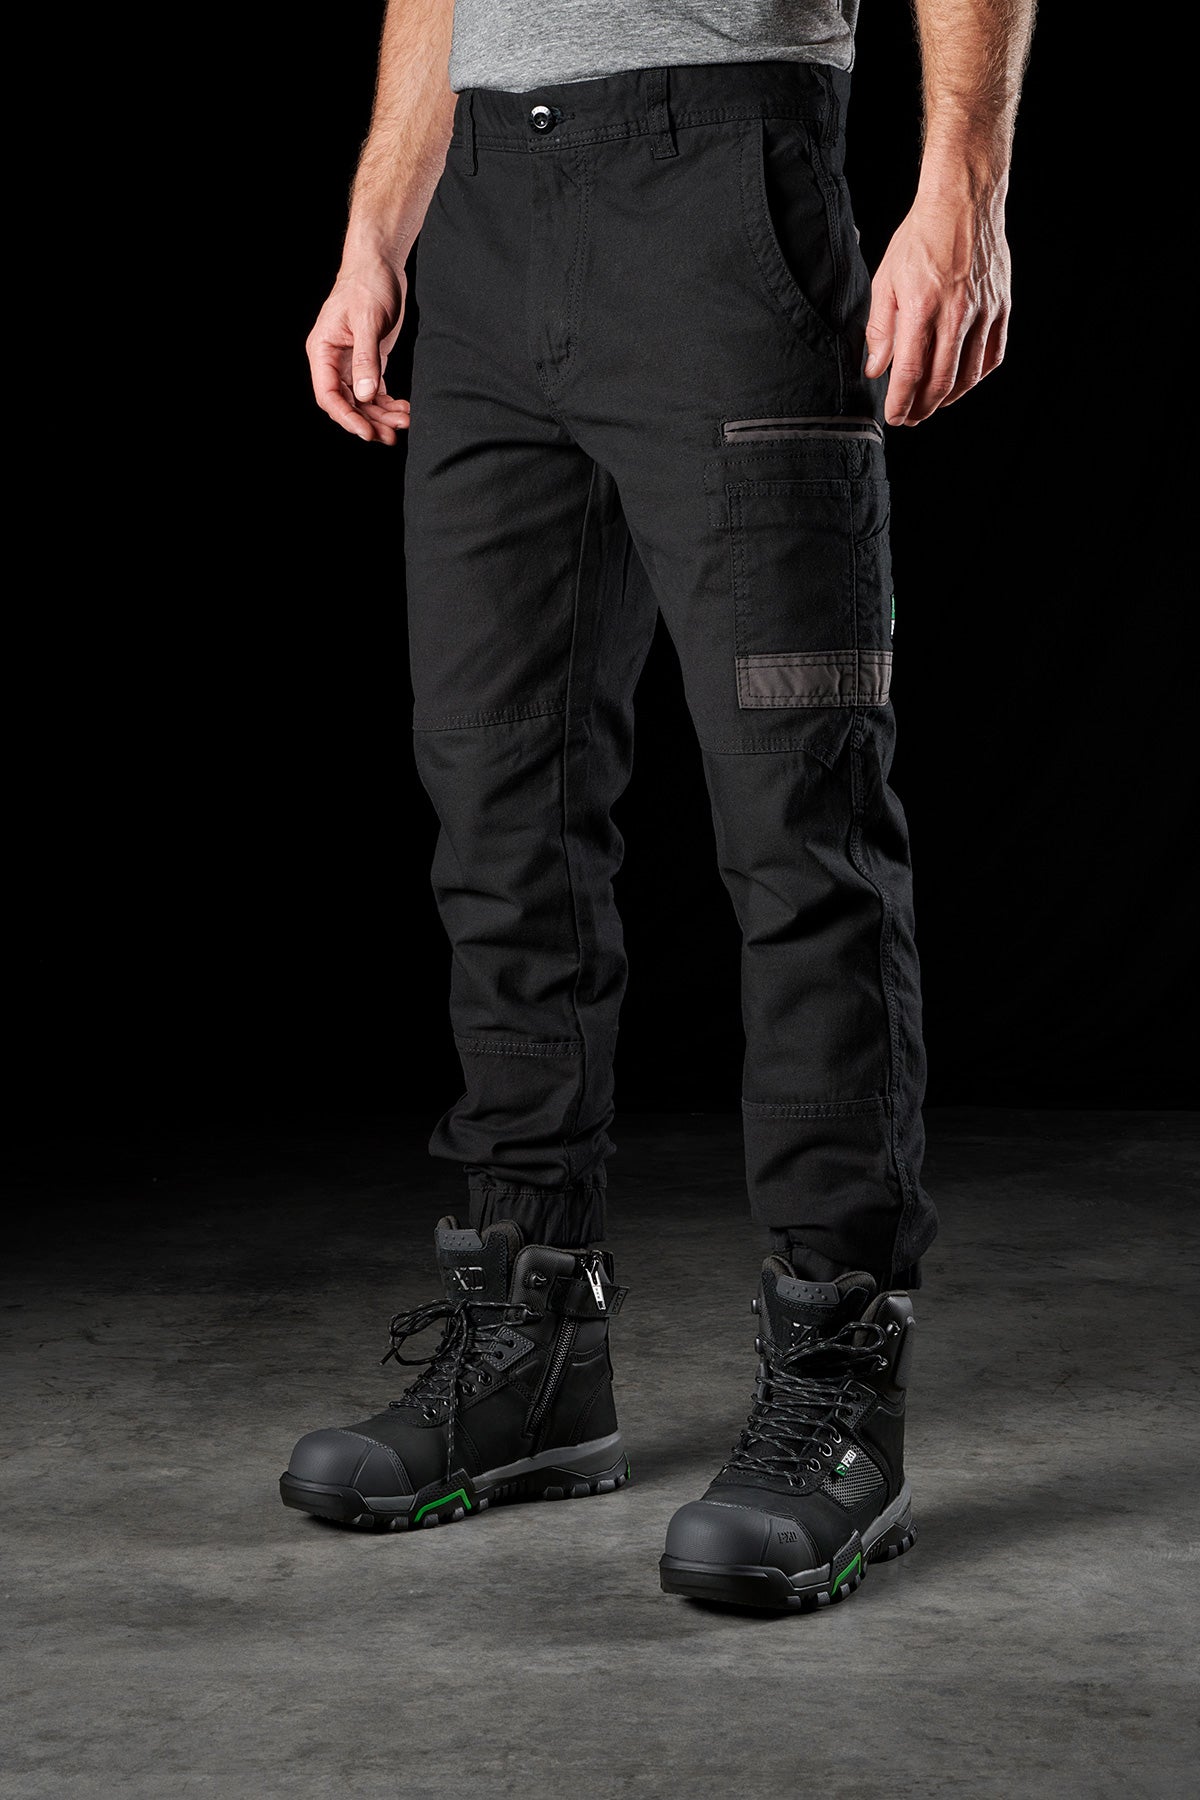 FXD WP-4 - Work Pant Cuff, Workwear Pants in Australia